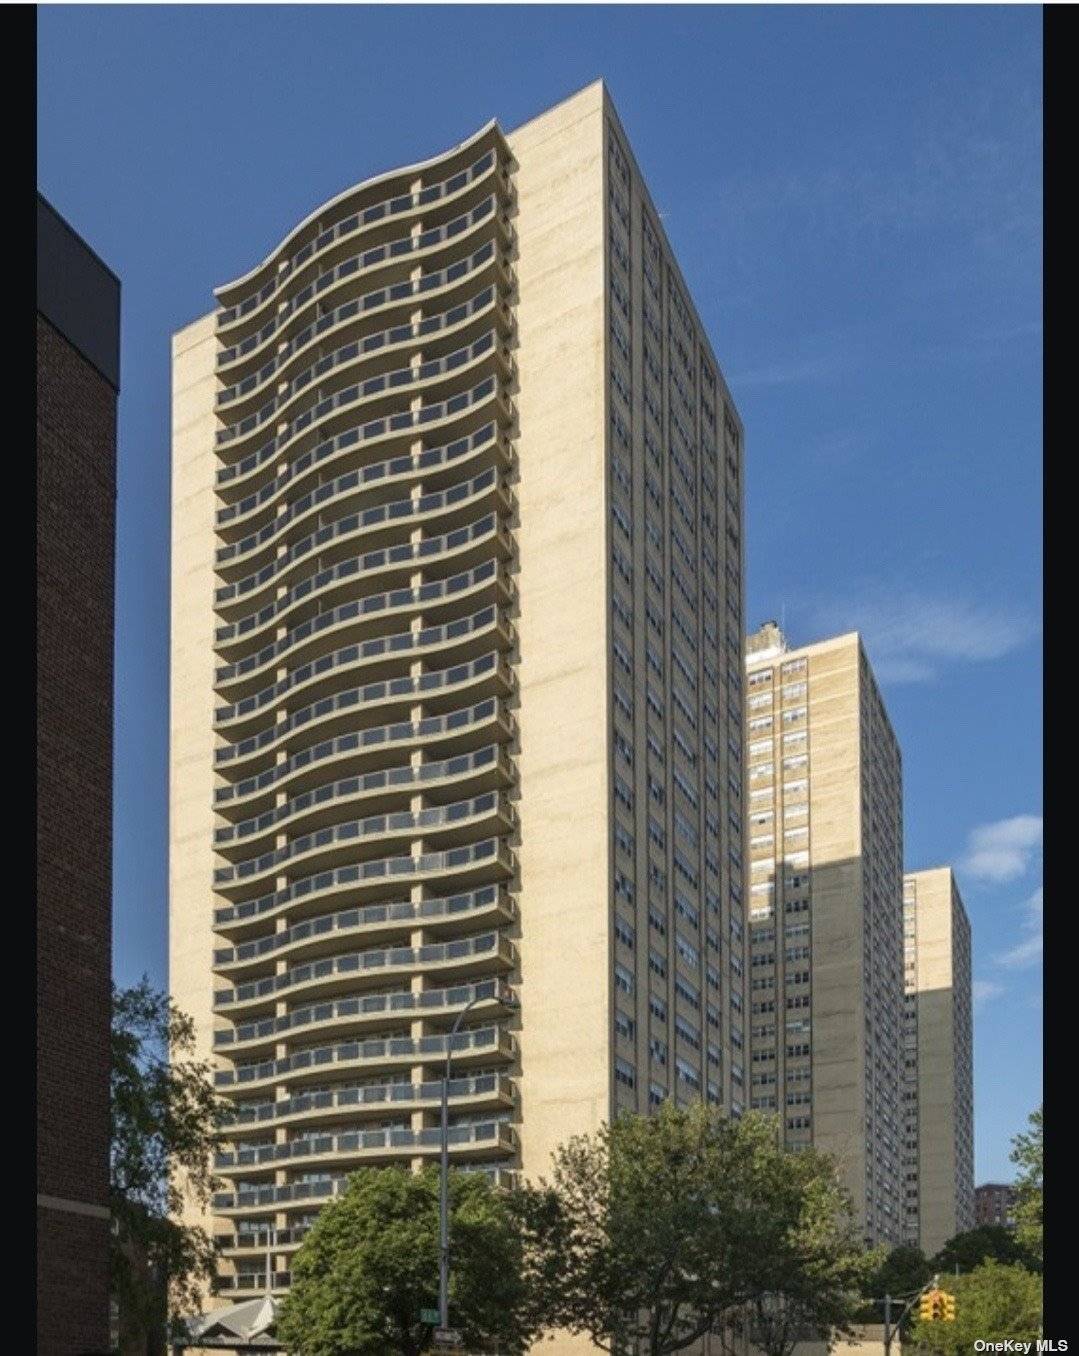 Birchwood Towers offers the ultimate in cooperative living, nestled in the heart of Forest Hills.